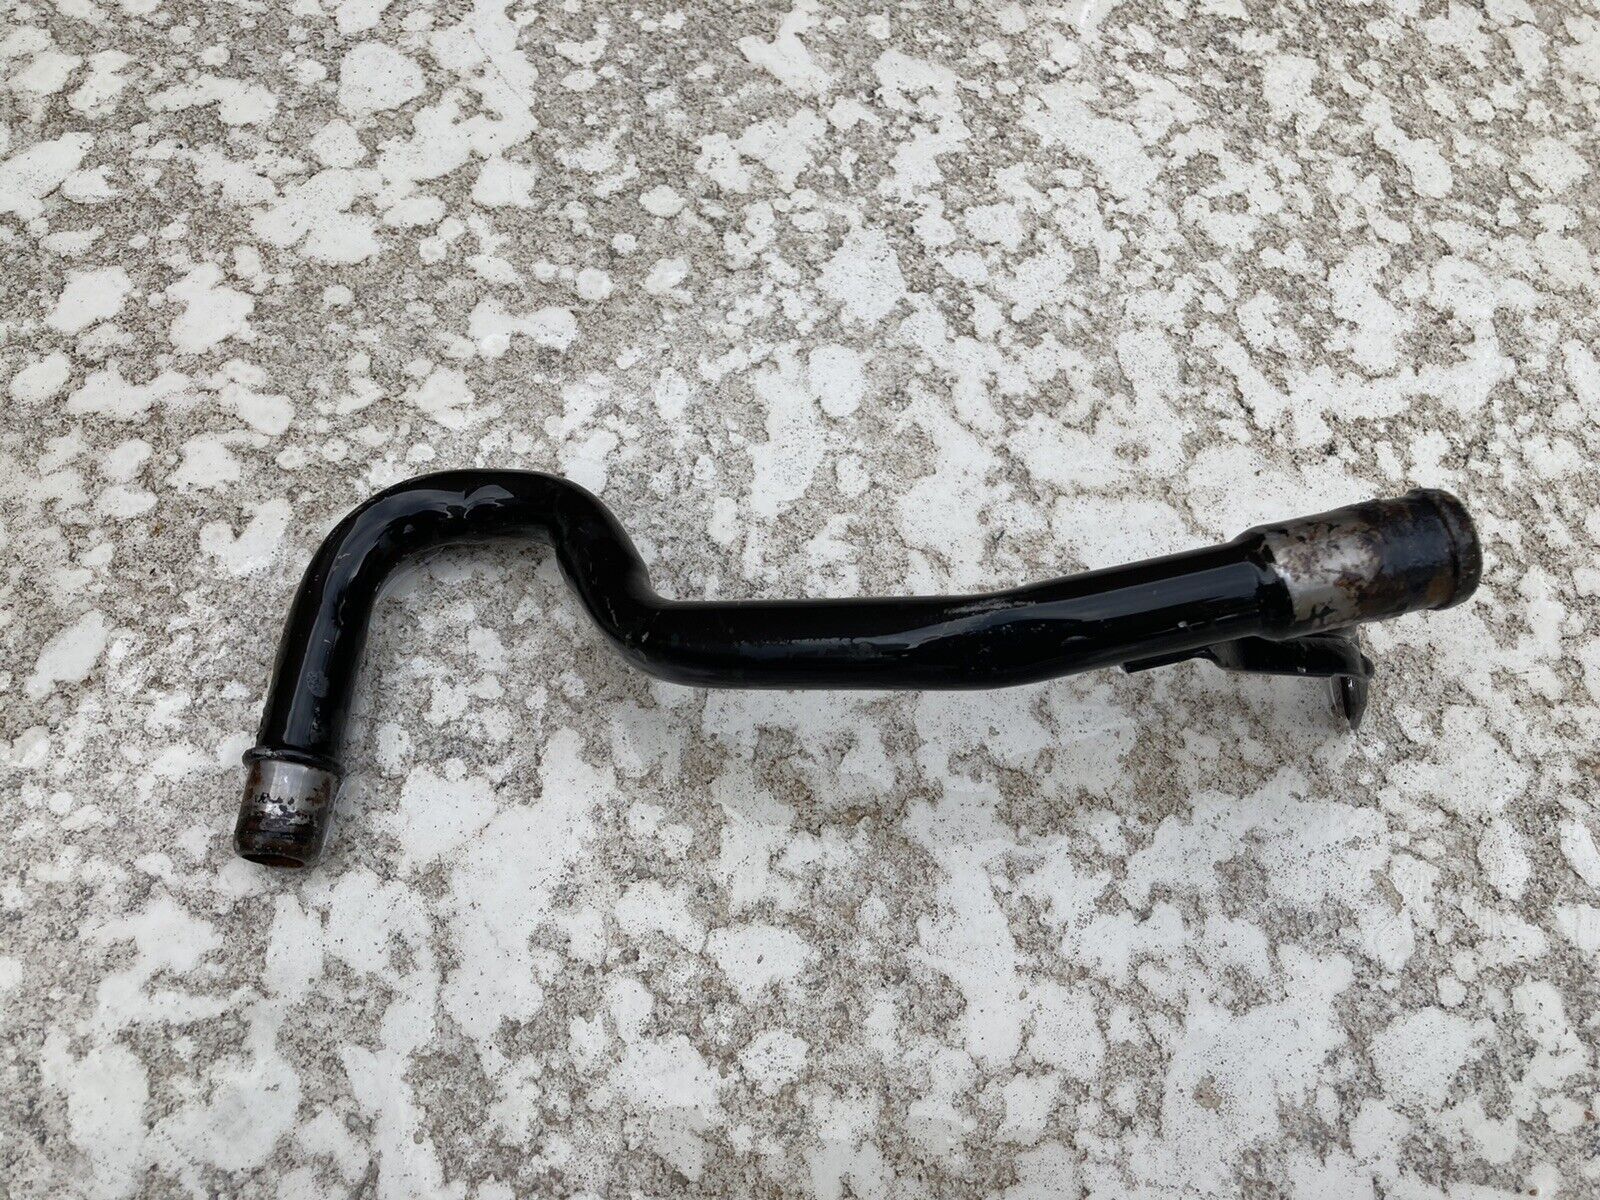 CADILLAC NORTHSTAR DEVILLE CROSSOVER HEATER CORE PIPE #2 2000-2005